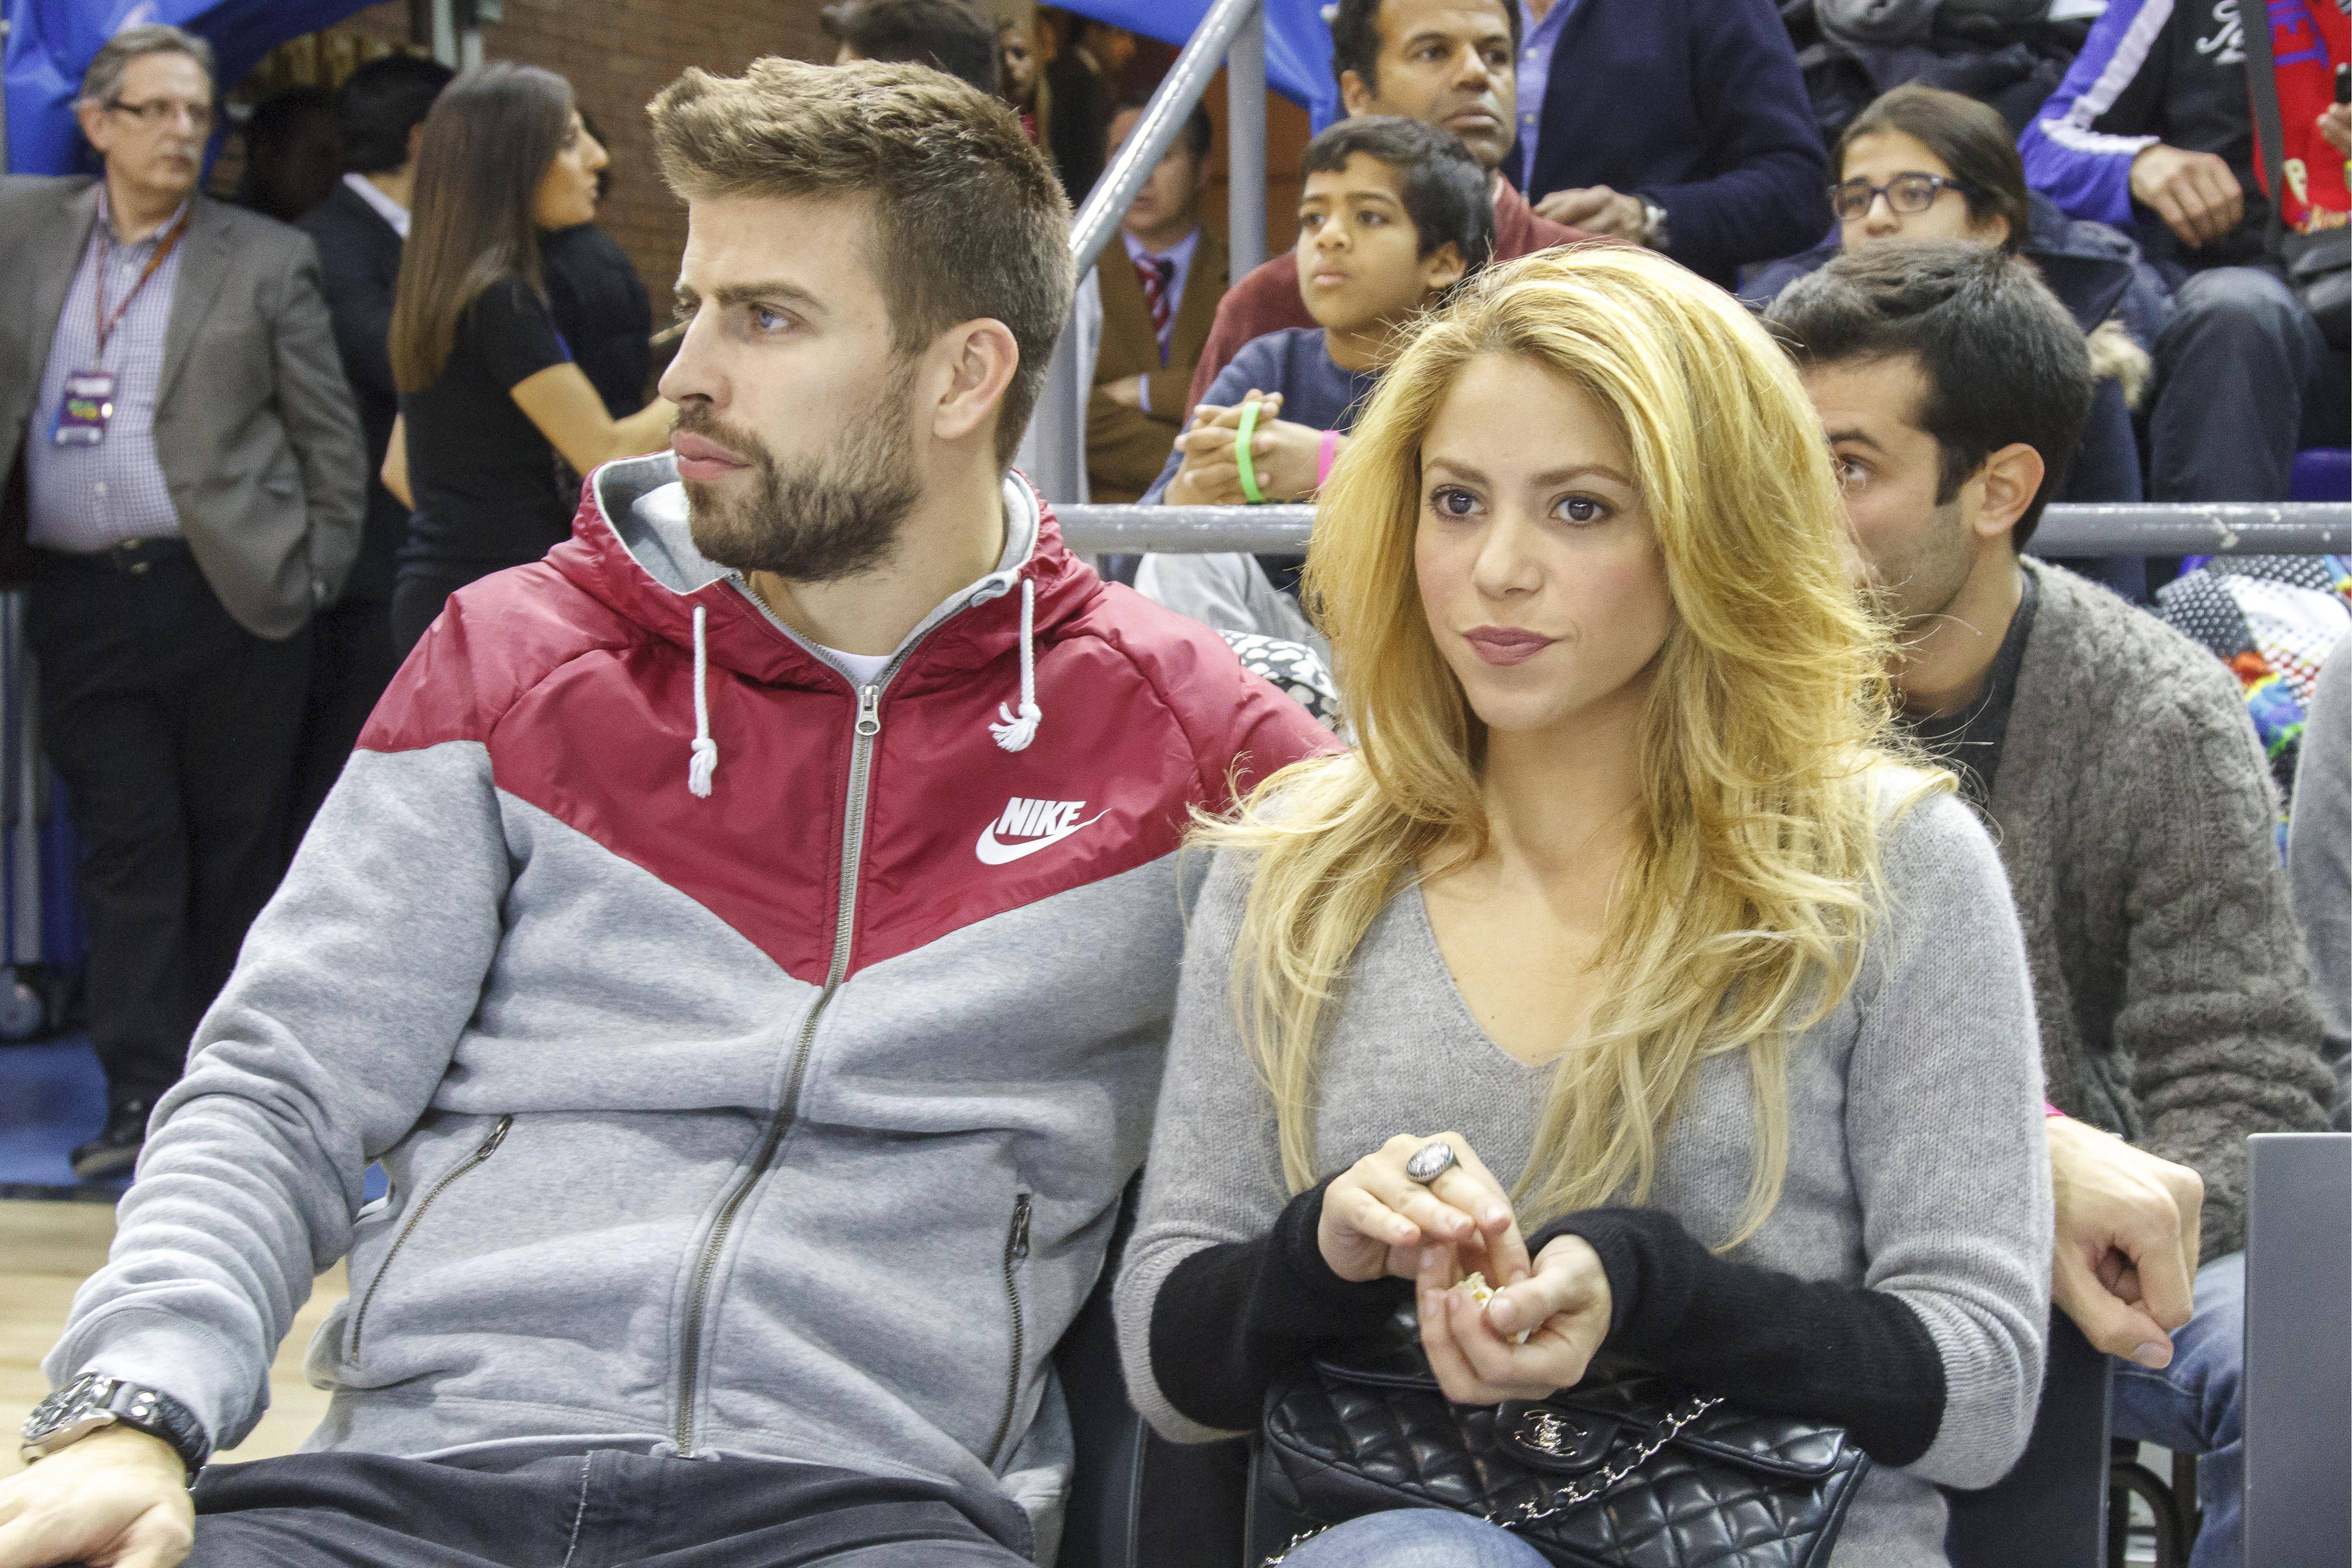 Shakira and Gerard Pique attend a Basketball match in Barcelona